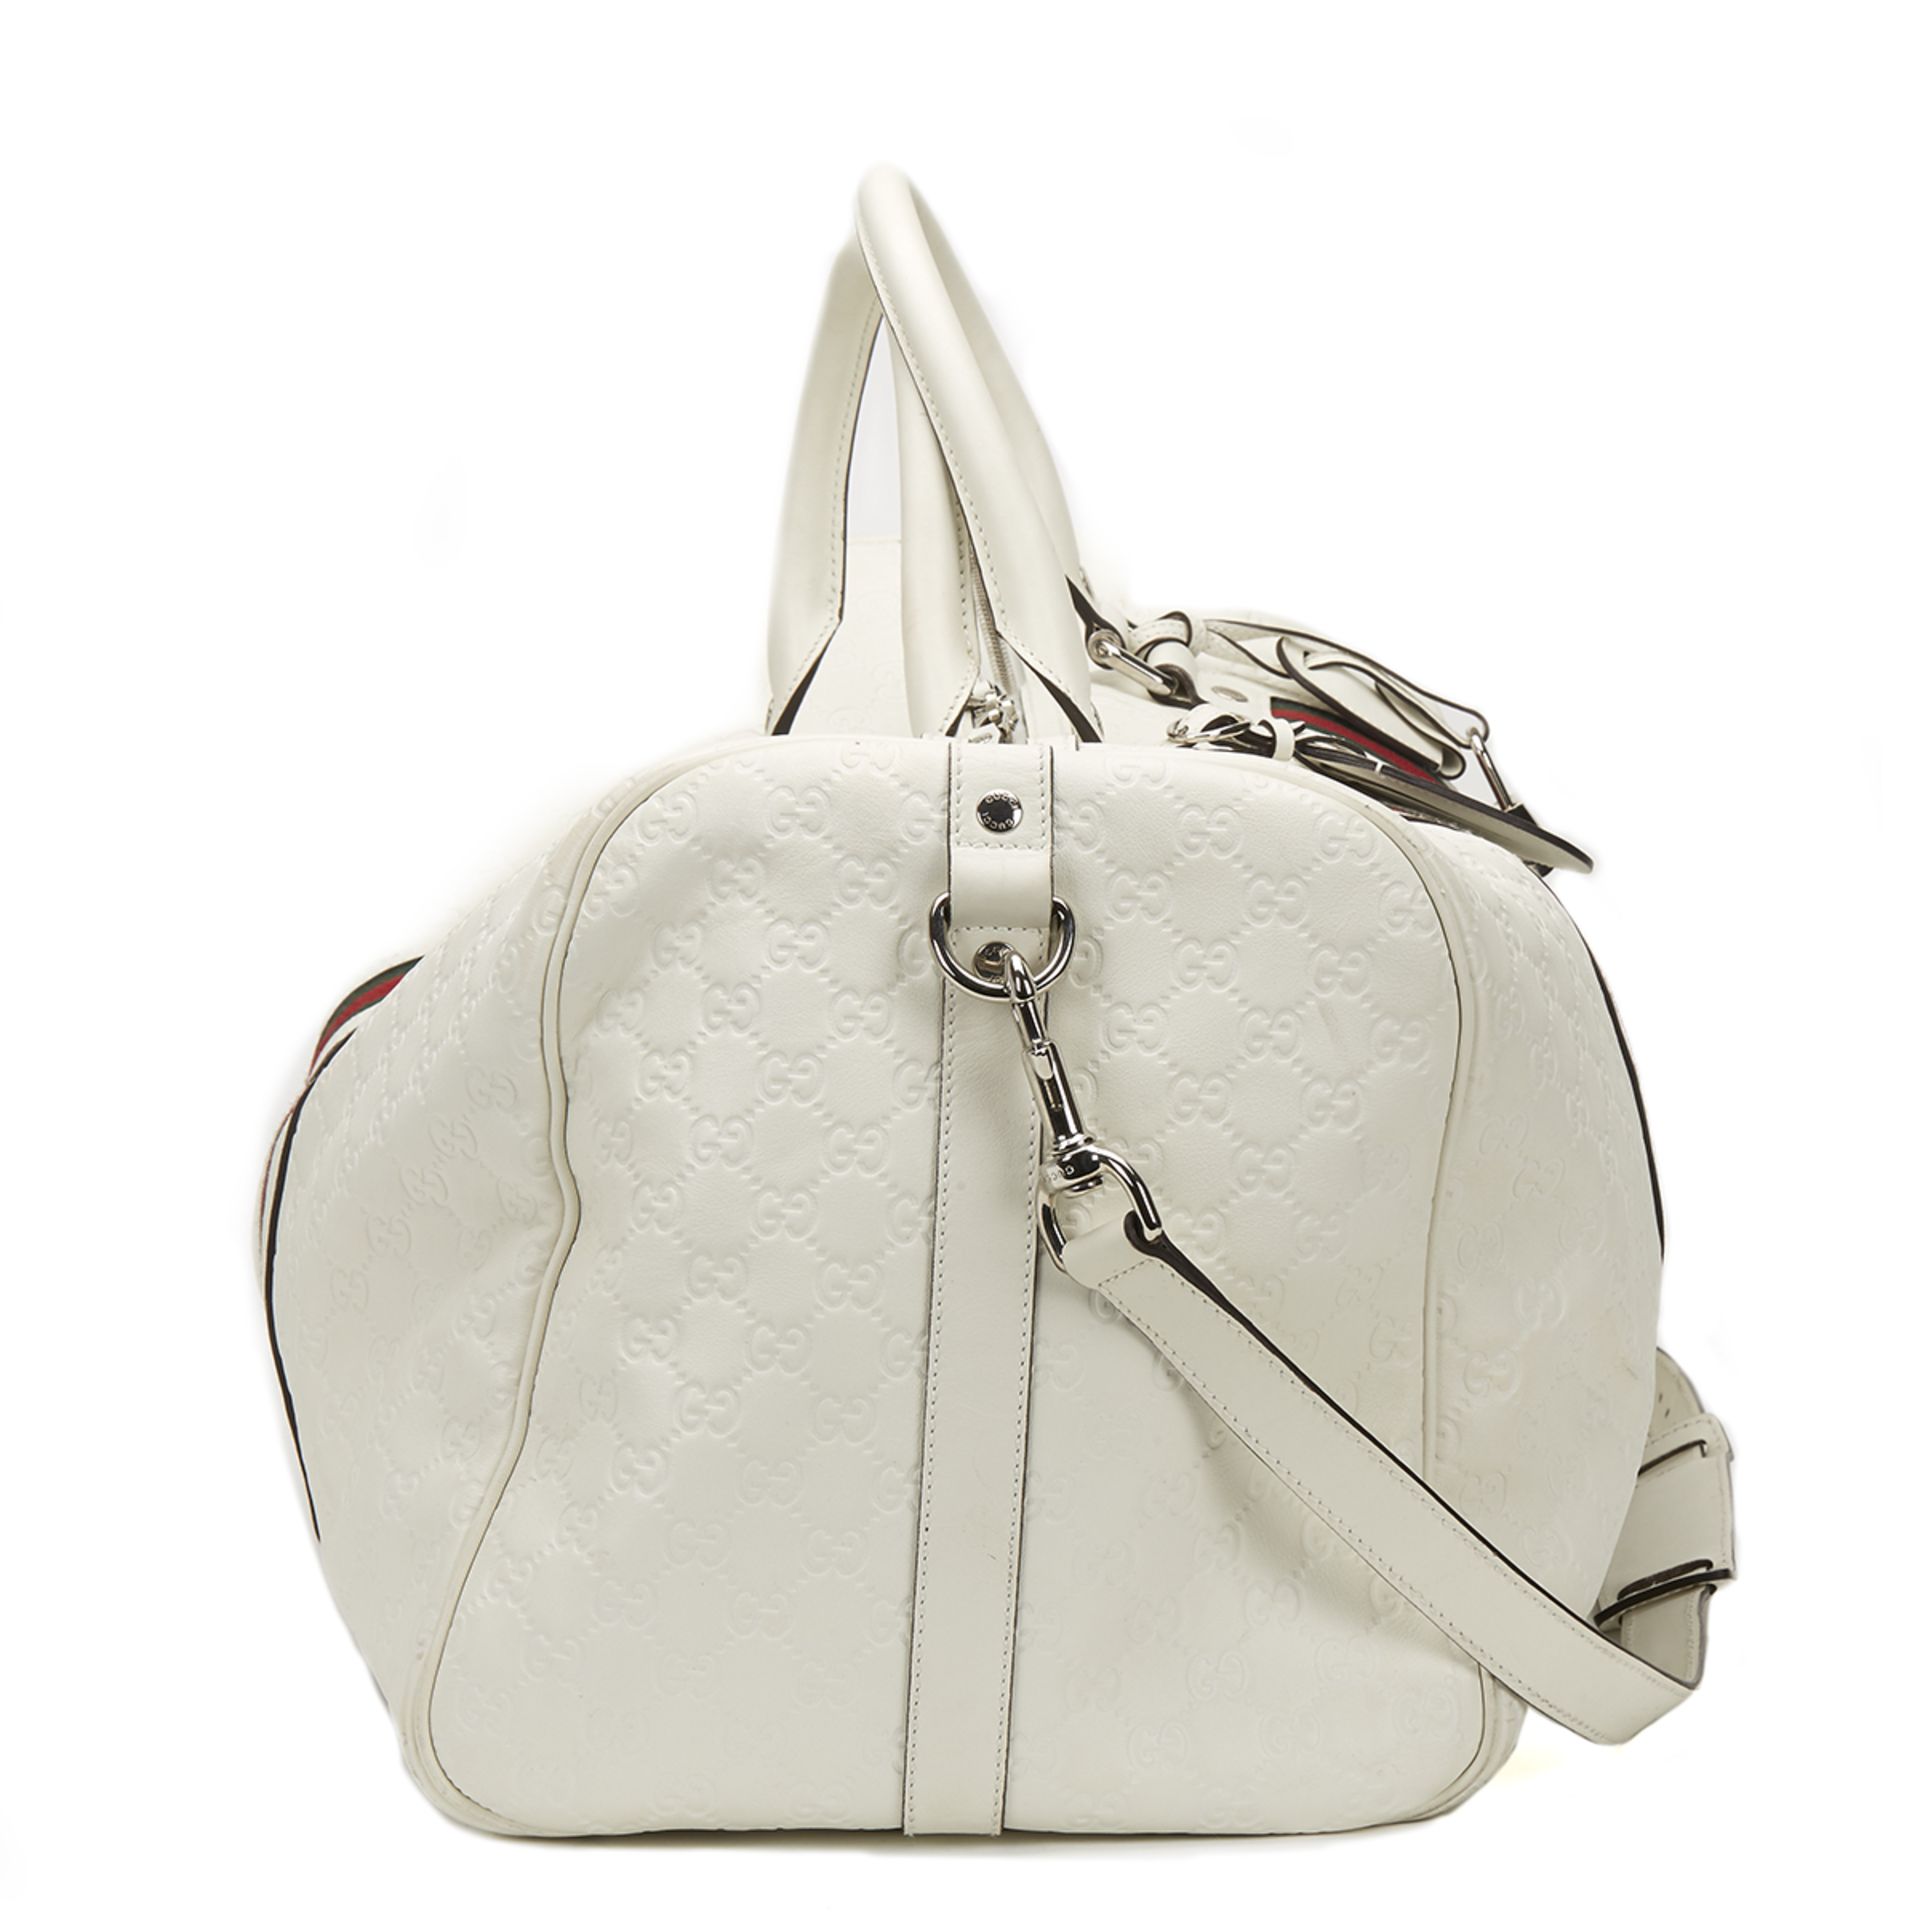 Gucci, Holdall - Image 2 of 8